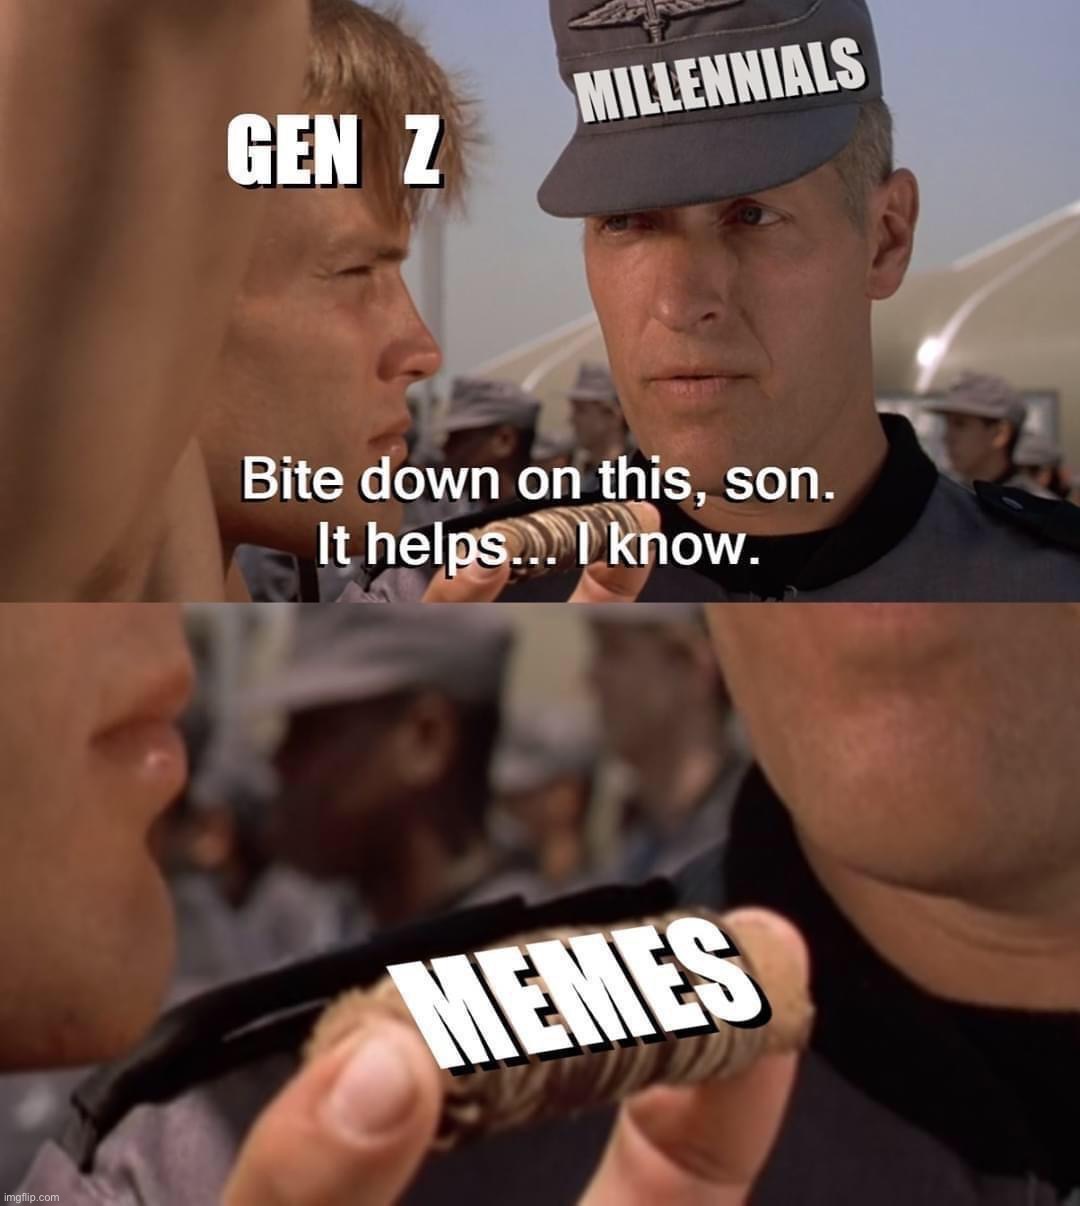 Millennial advice to Gen Z | image tagged in millennial advice to gen z | made w/ Imgflip meme maker